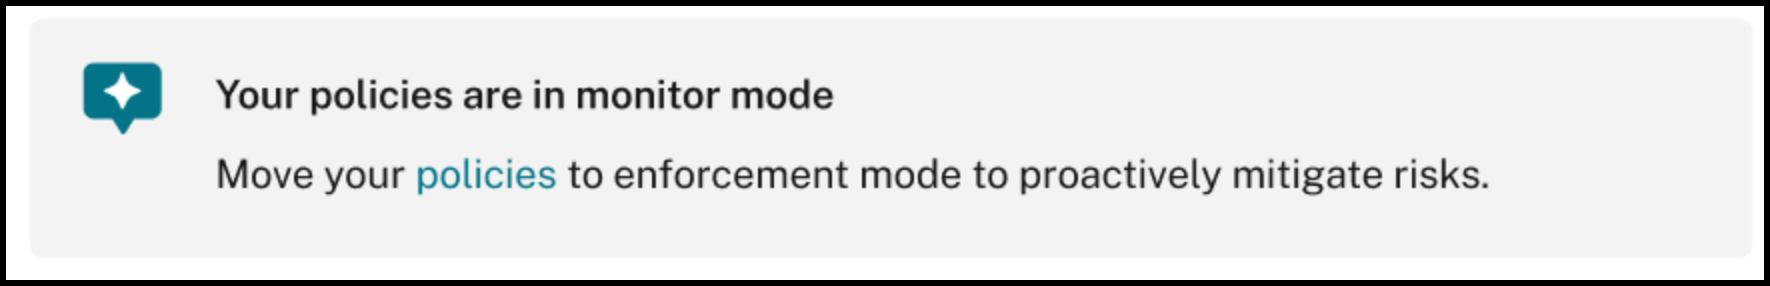 Policies in monitor mode